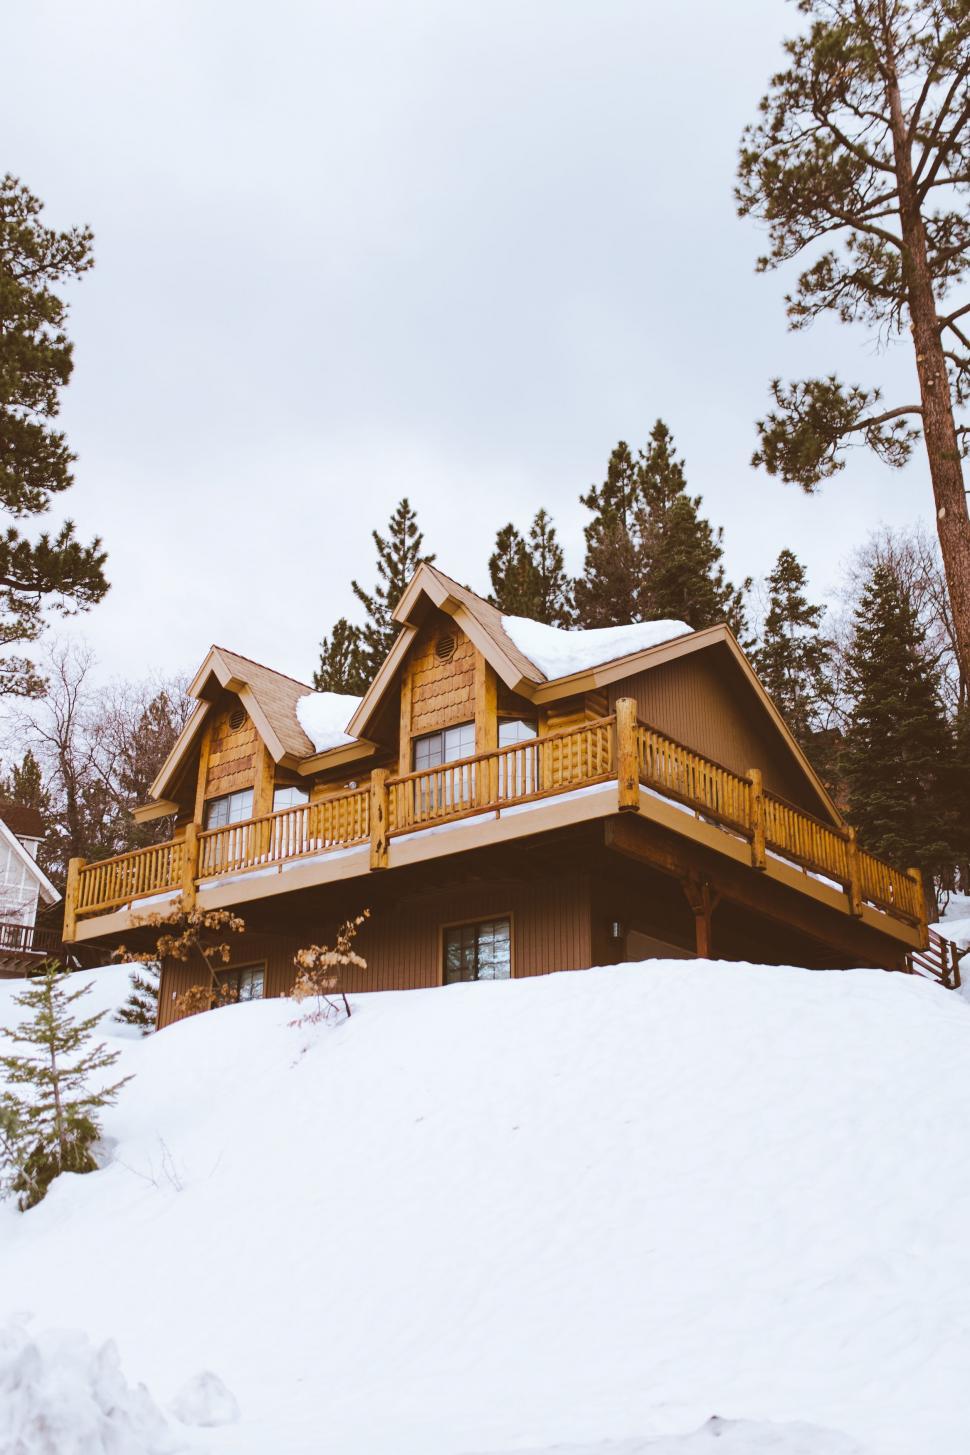 Free Image of House on a Hill Covered in Snow 